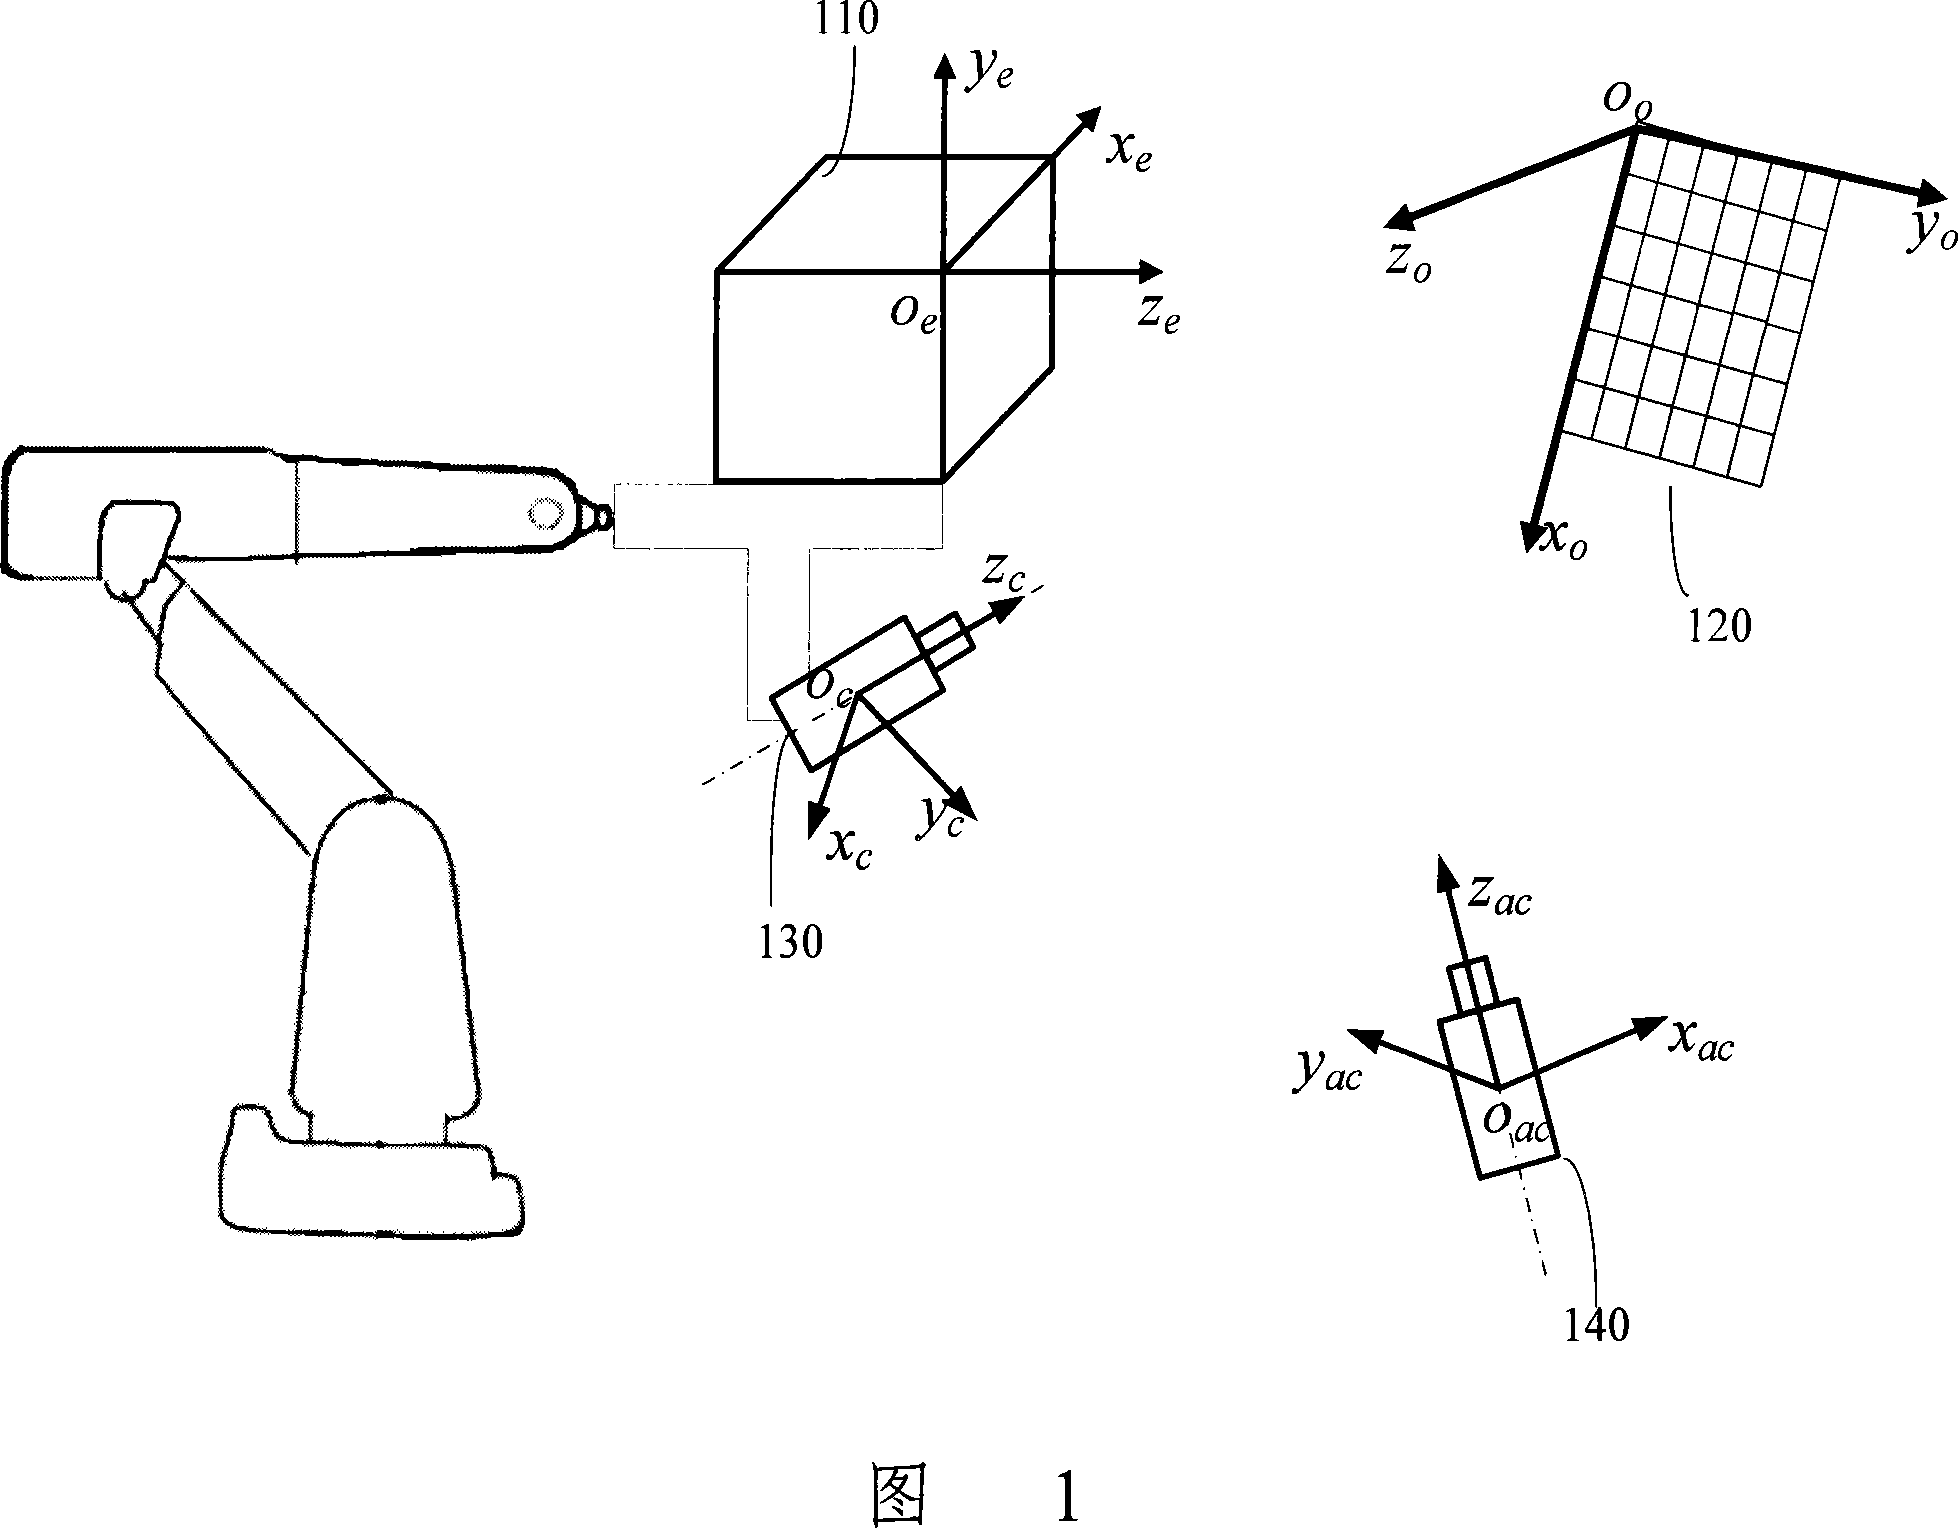 Method for demarcating robot stretching hand and eye